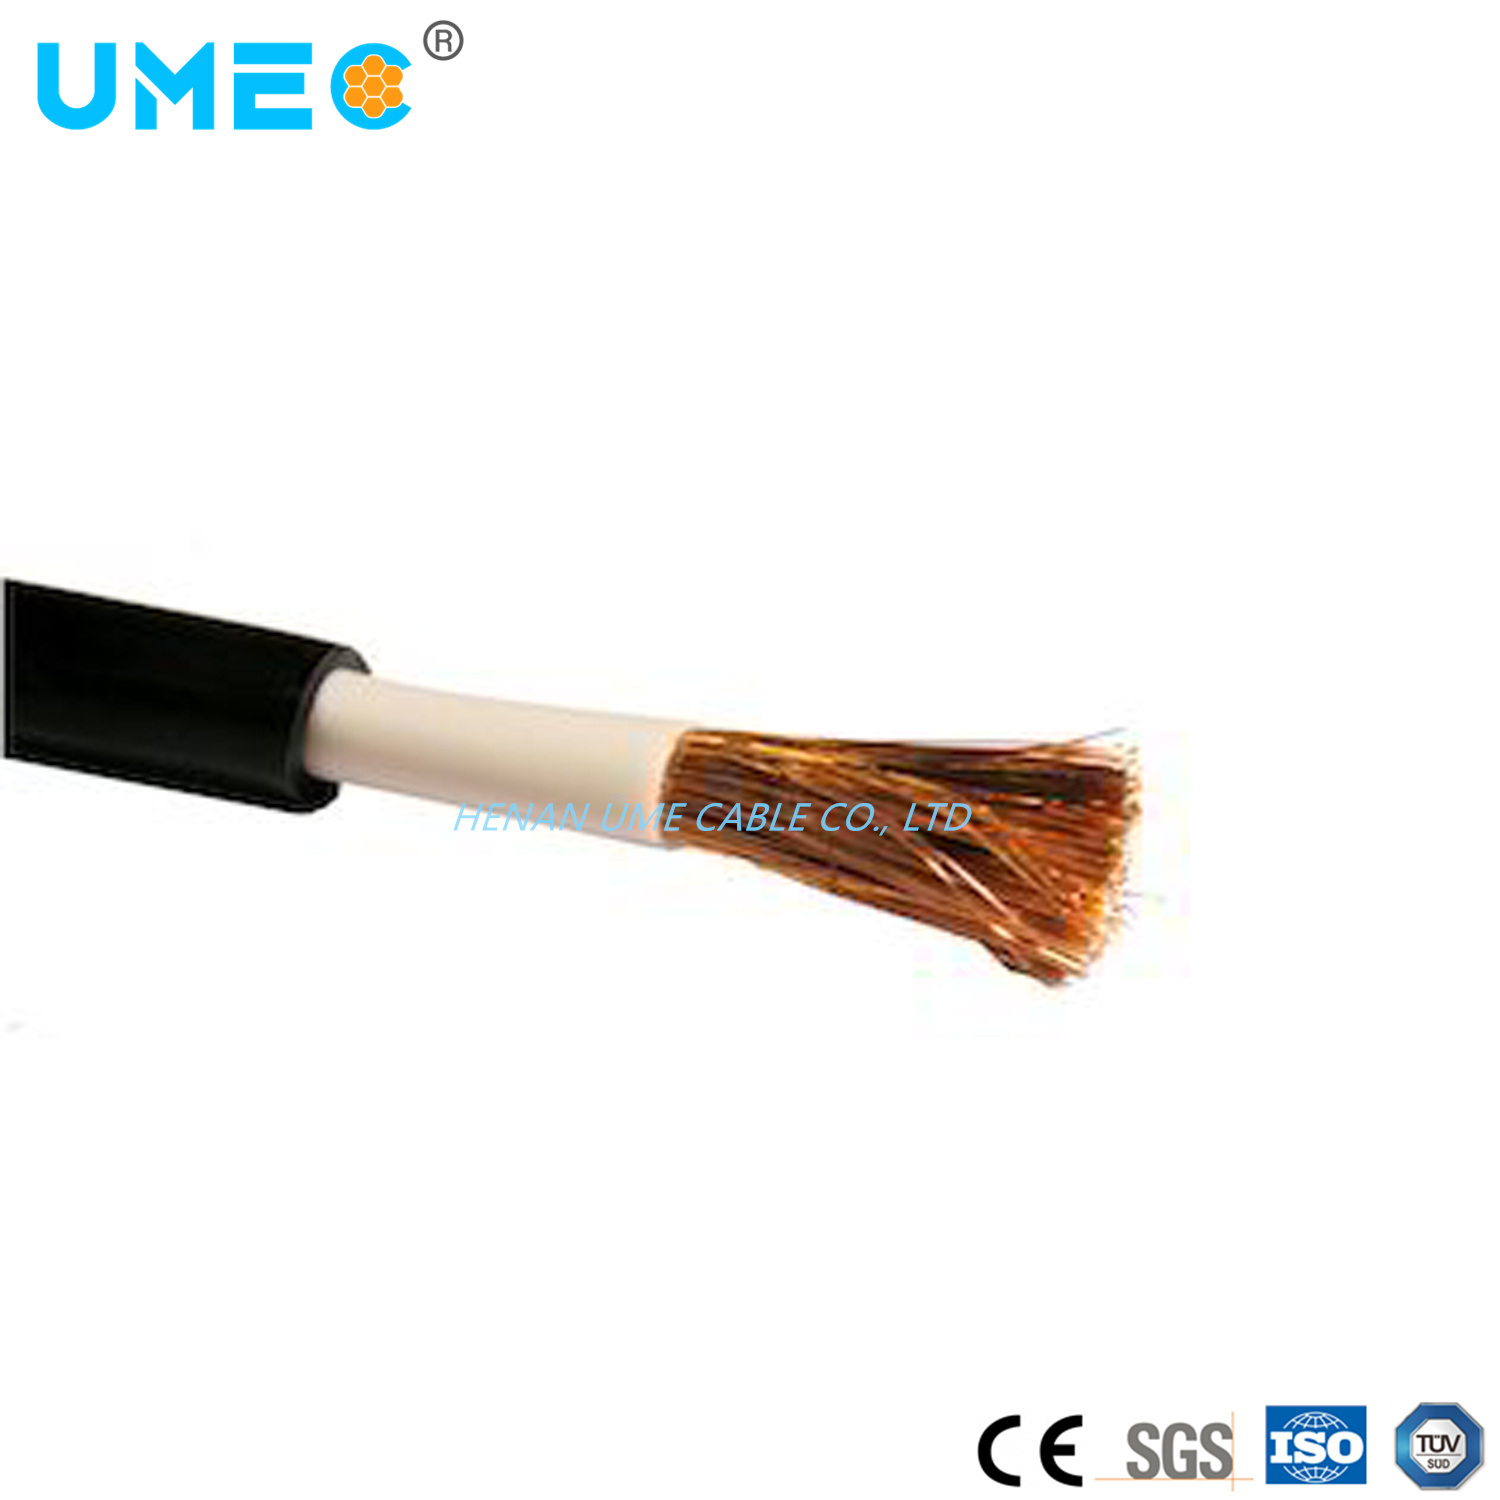 IEC 60245 Standard Arc Welding Cable Neoprene/ Epr/ CPE Sheath 1X35 1X50mm2 Yh Yhf Rubber Cable Wire